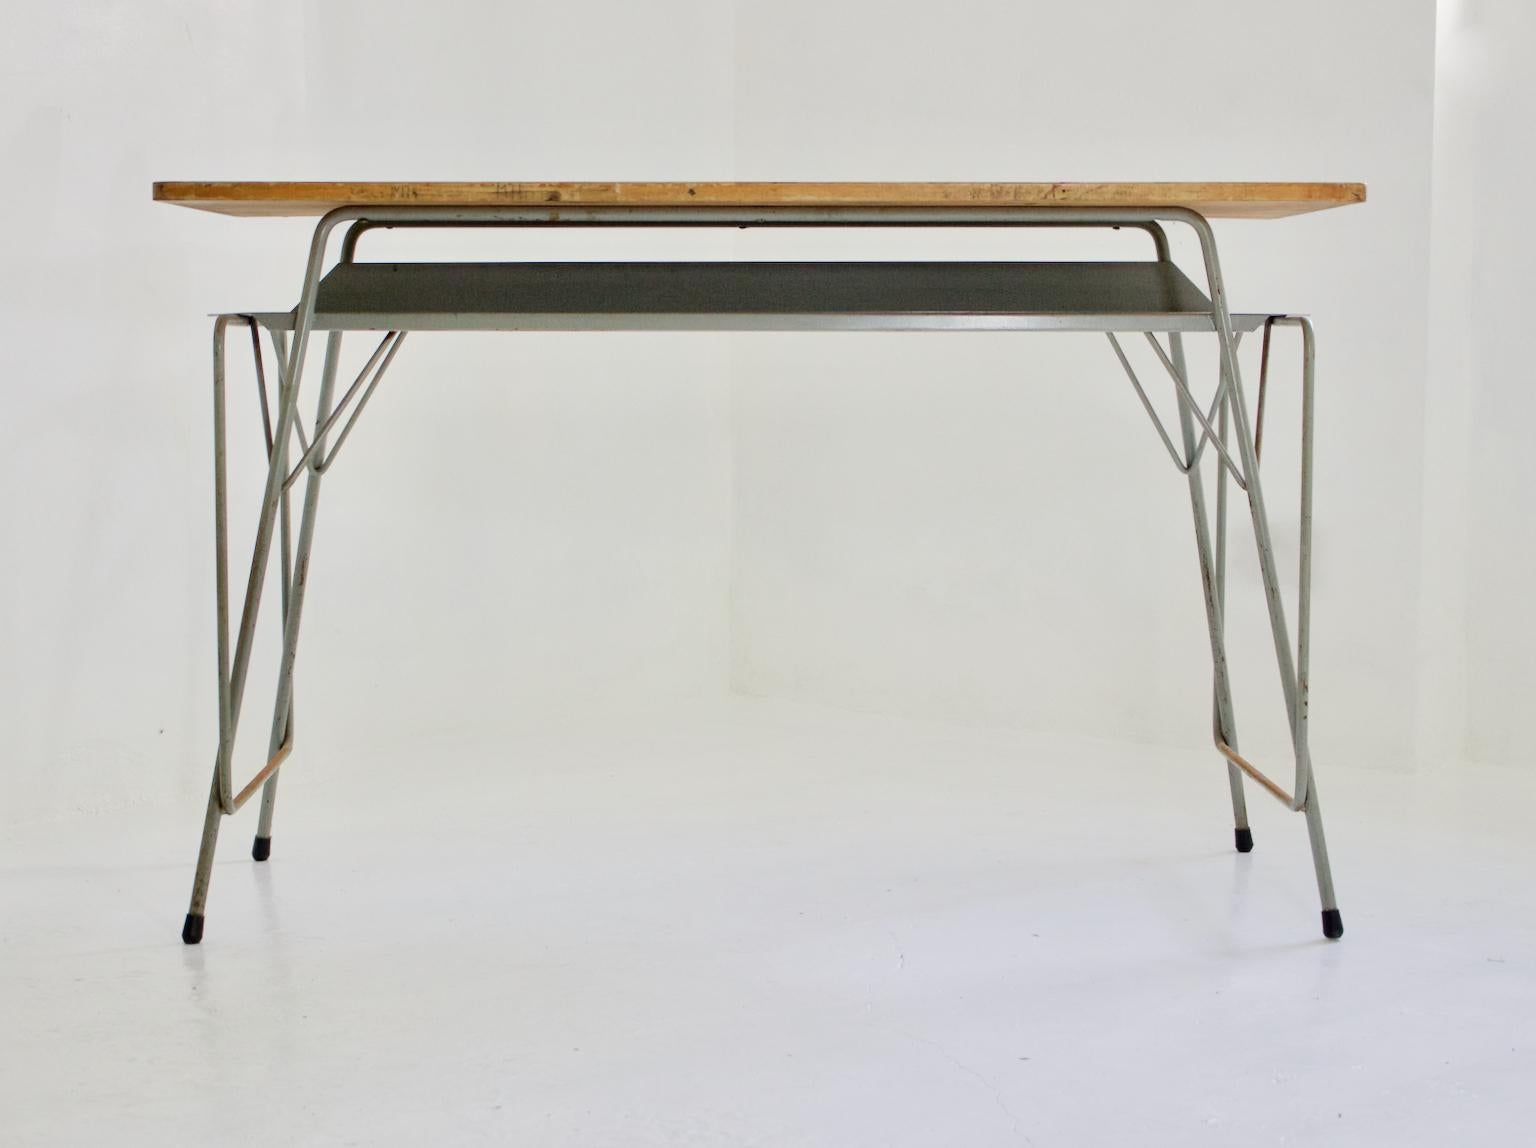 Large mid-century writing desk by Belgian architect and designer, Willy Van Der Meeren, 1950s.

French grey steel base and storage shelf, with plywood top and interesting detailing to the legs. 

The piece has come from a Belgian school and is